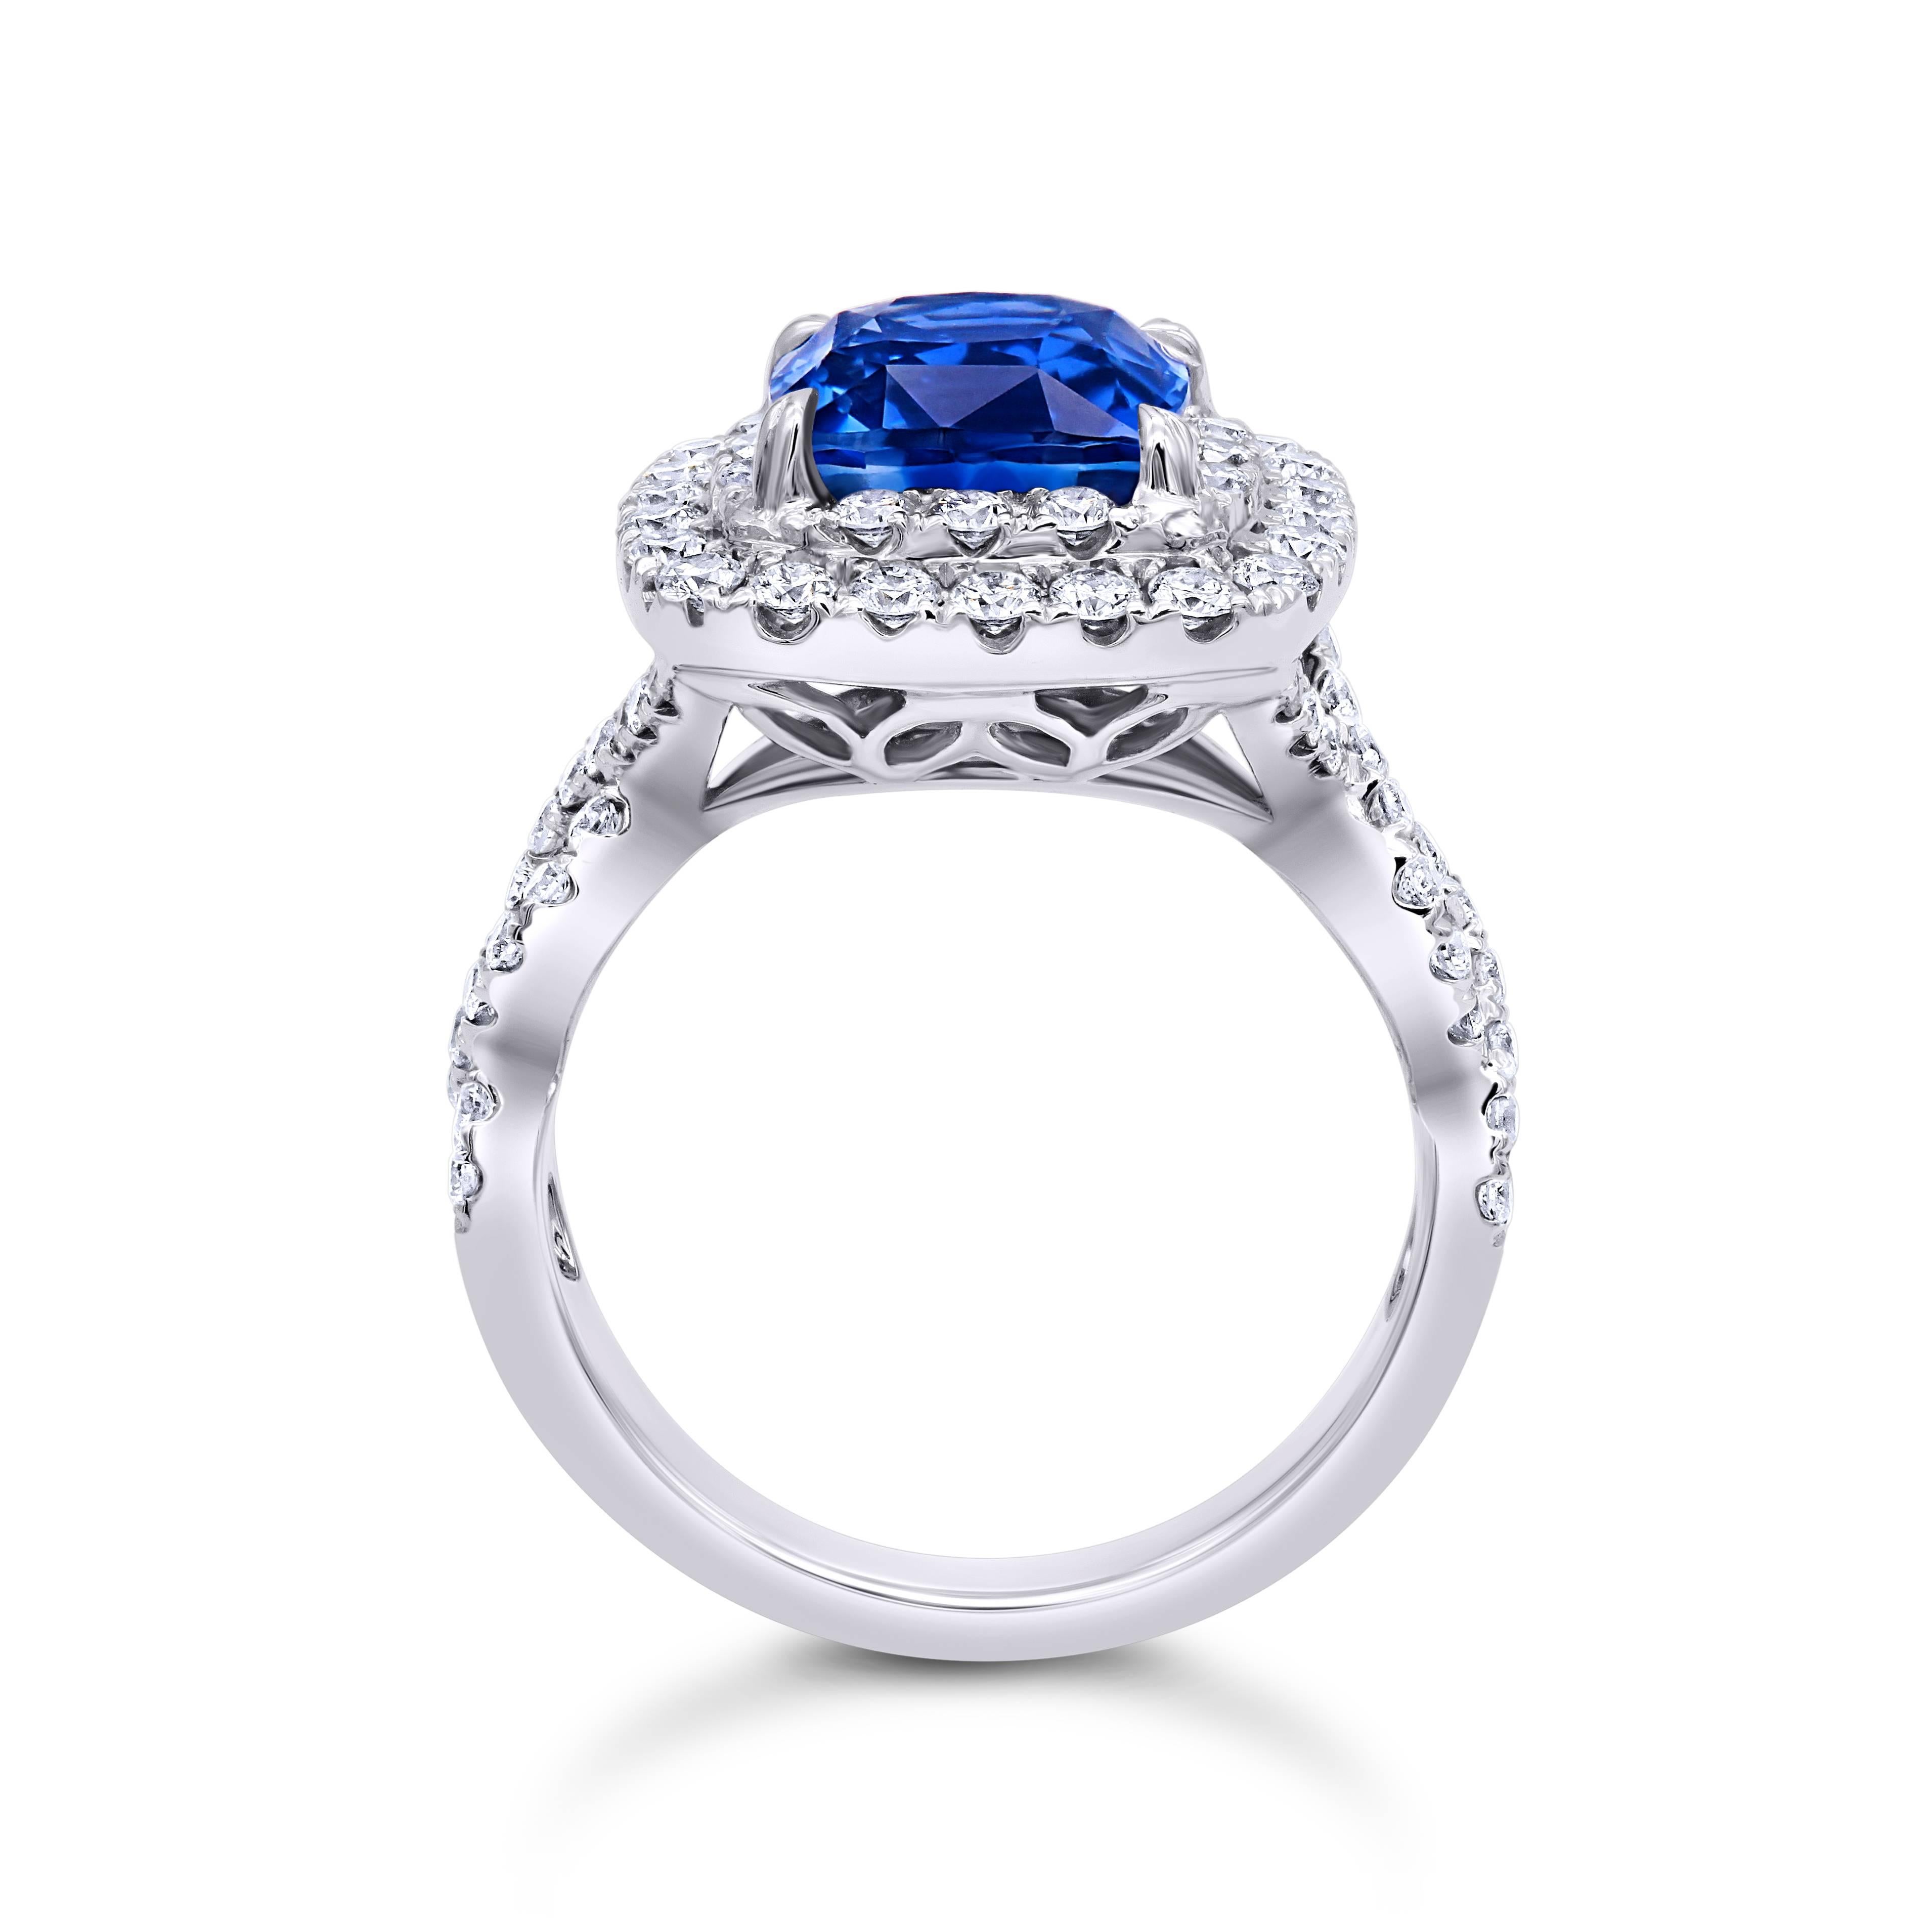 Cushion Cut 3.47 Carat Blue Sapphire and Diamond Ring For Sale